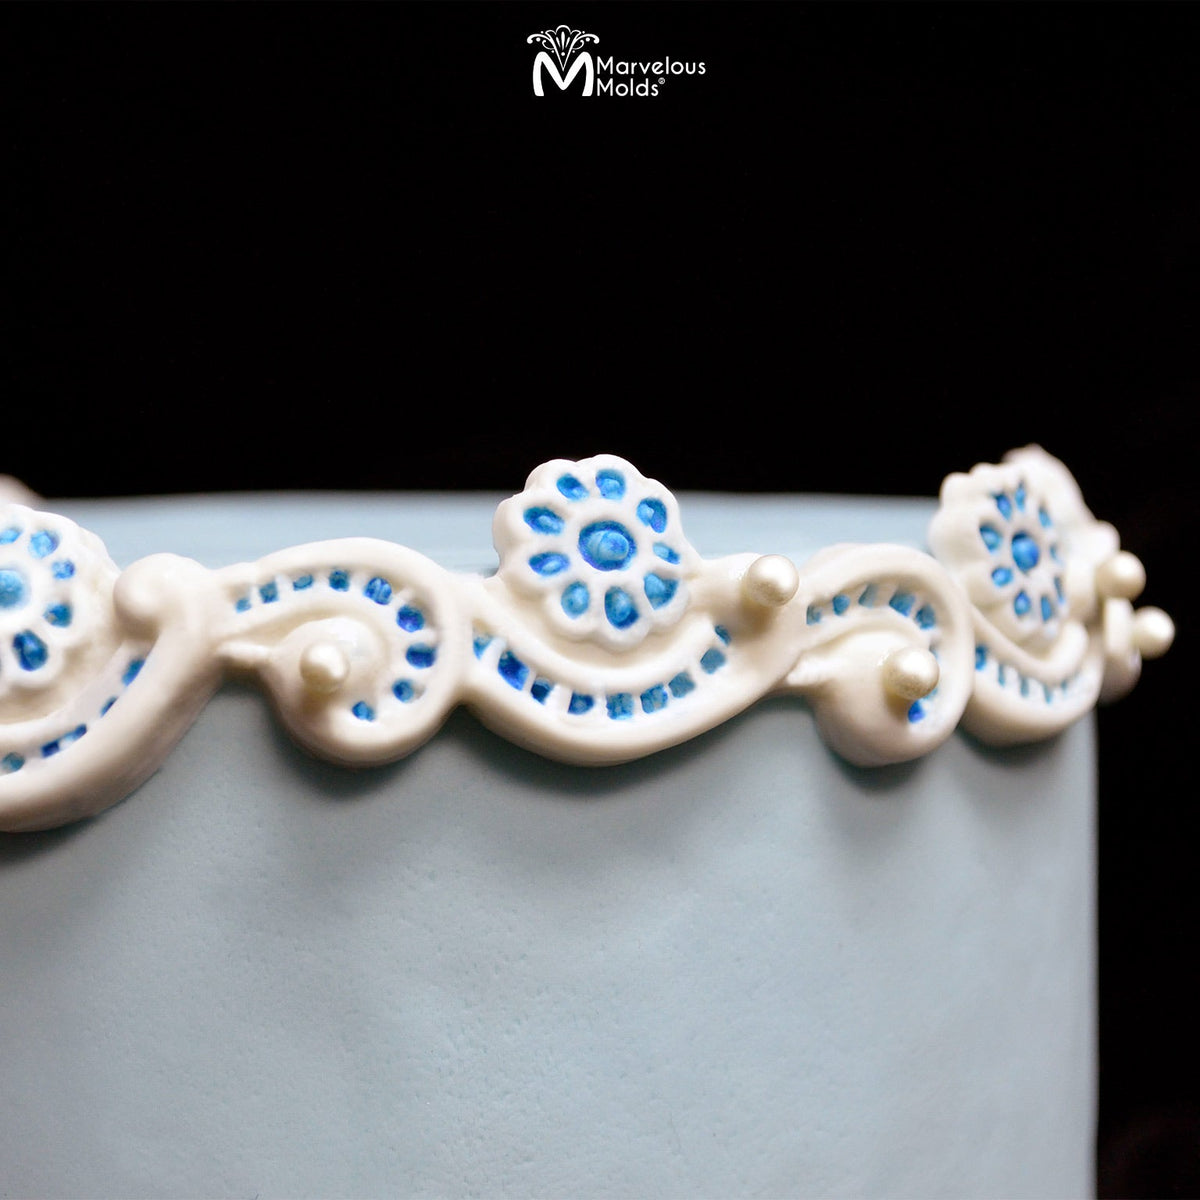 Lace Cake Border Decorated with the Marvelous Molds Karla Lace Silicone Mold